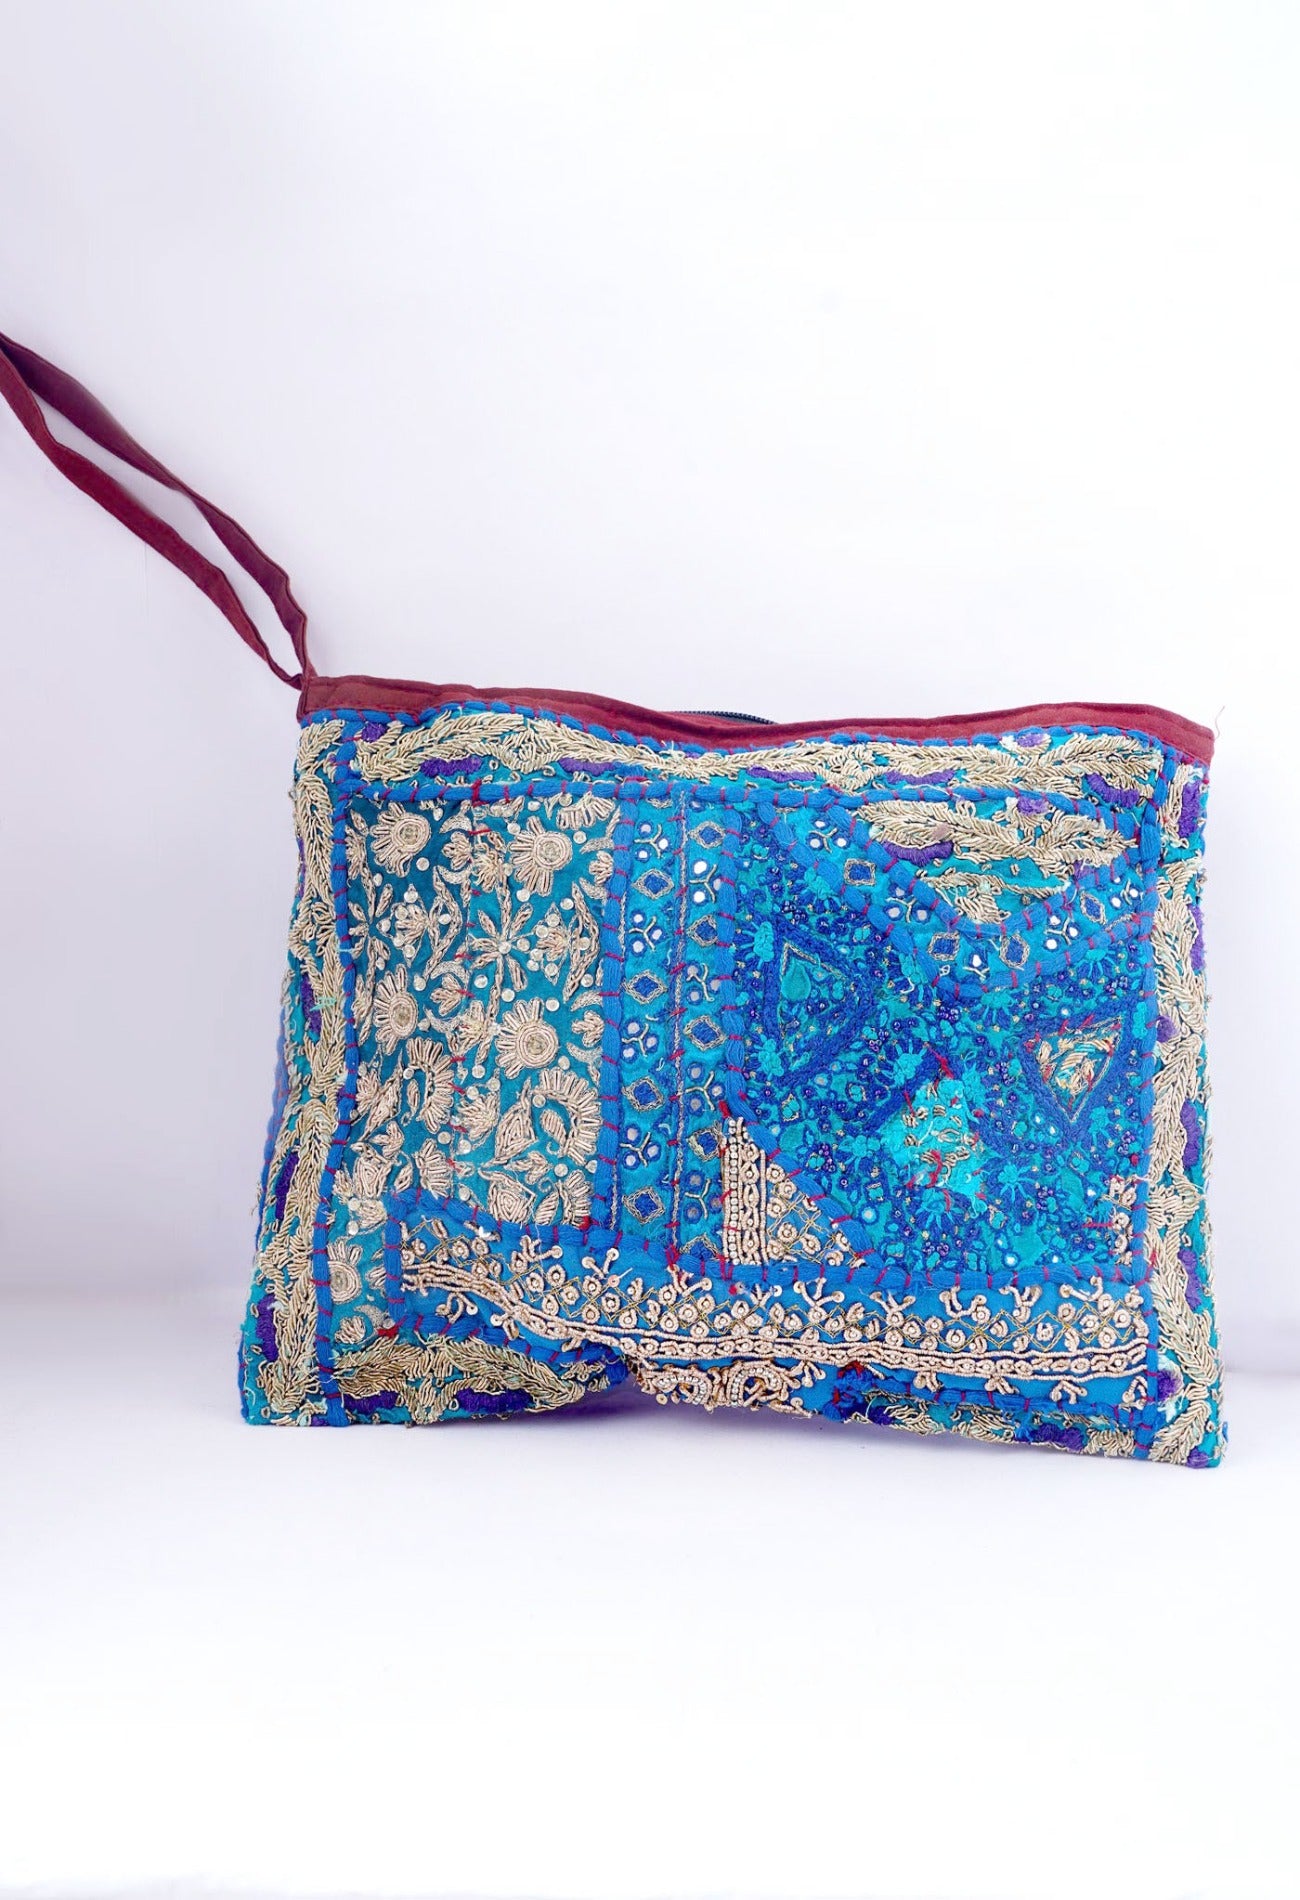 Online Shopping for Blue Indian Handicraft Embroidered Hand Bag with Weaving from Rajasthan at Unnatisilks.com India_x000D_
Online Shopping for Blue Indian Handicraft Embroidered Hand Bag with Weaving from Rajasthan at Unnatisilks.com India_x000D_
